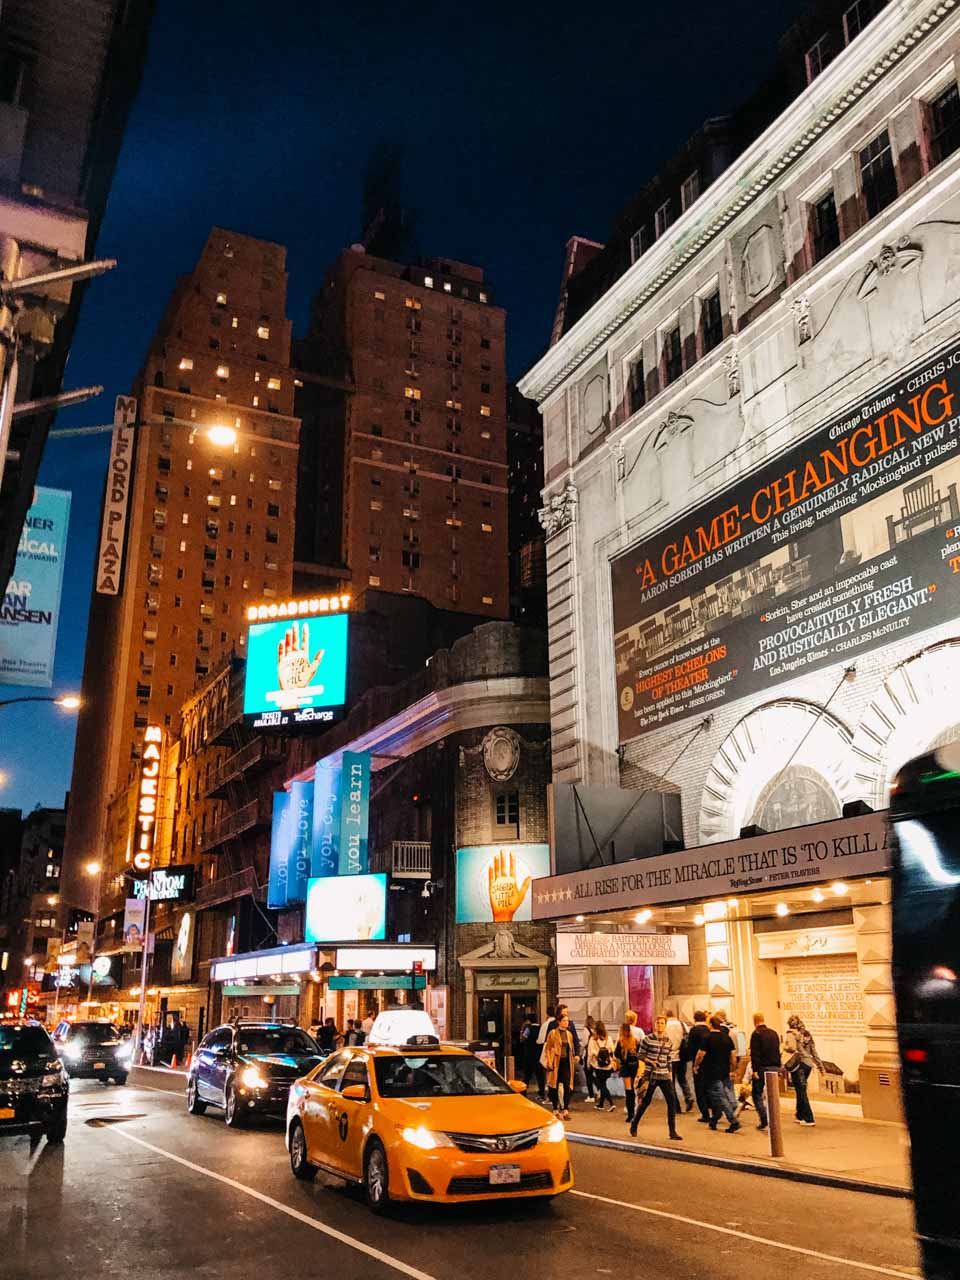 The outside of Broadway's Majestic Theatre in New York City at night